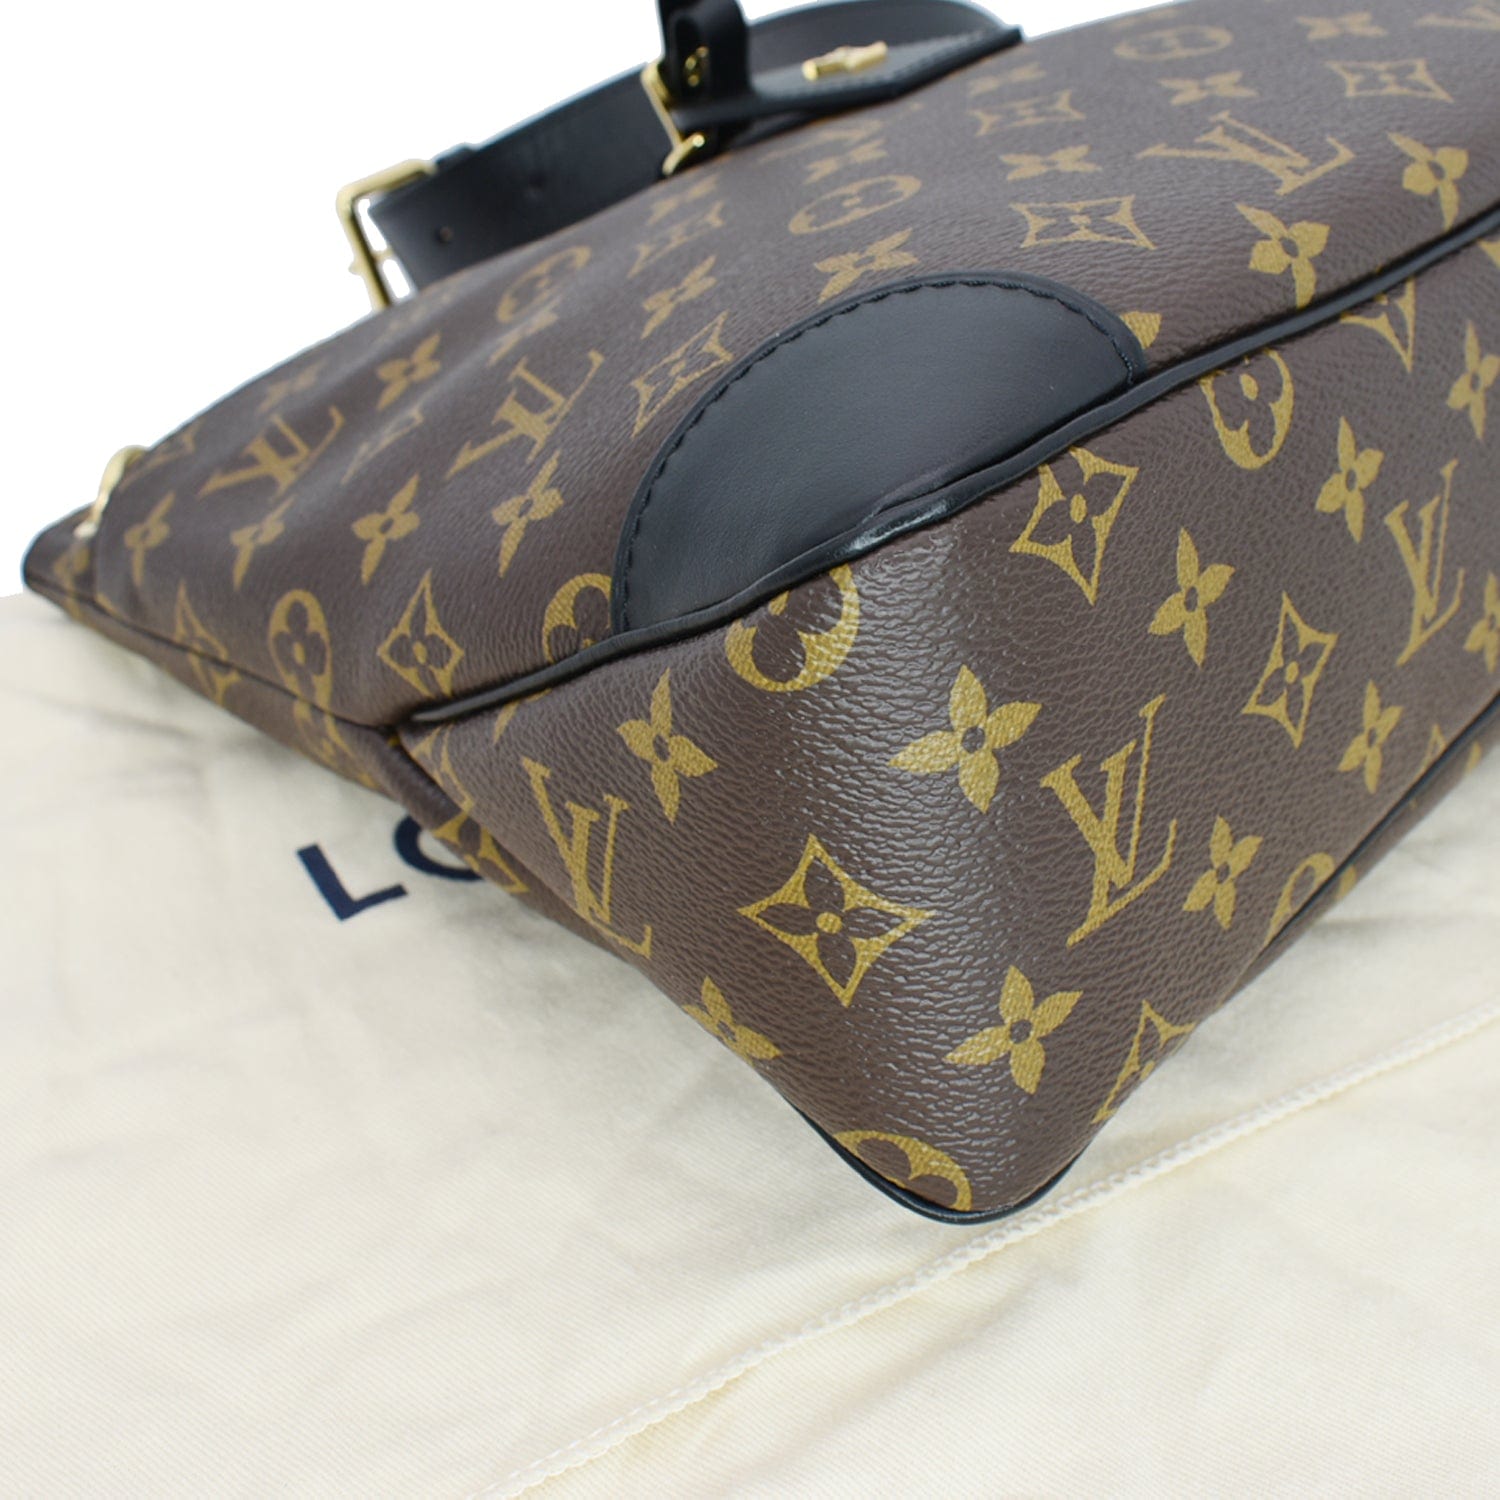 Louis Vuitton ODEON TOTE MM in BROWN/BLACK CANVAS. ITEM# N45283. NEW &  AUTHENTIC